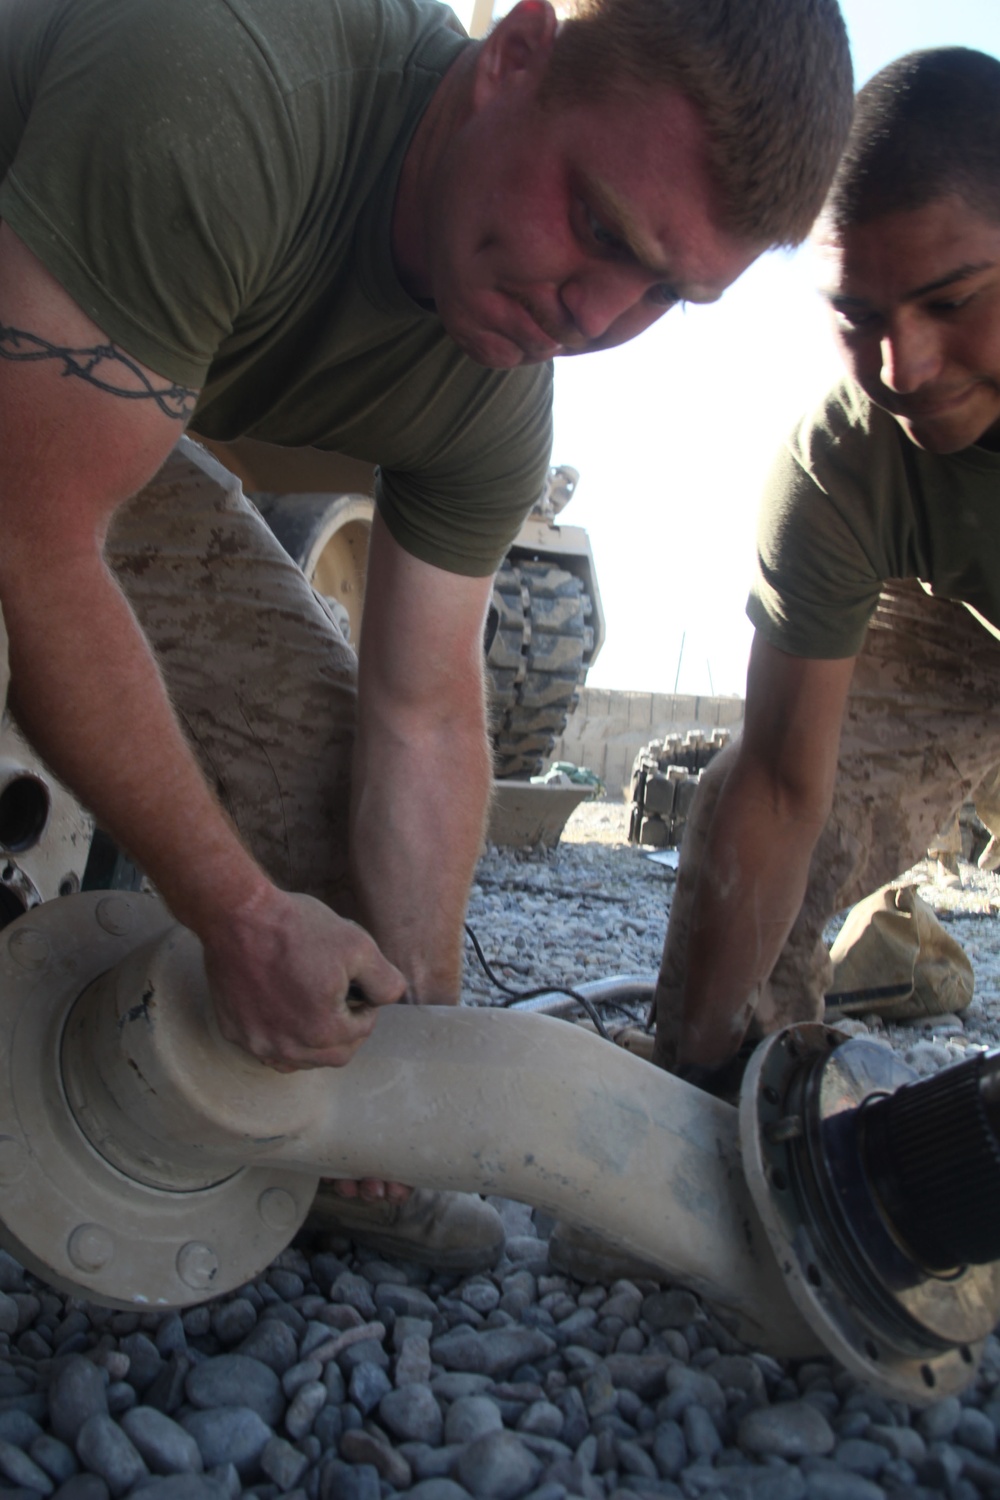 Vehicle maintenance keeps Marines in the fight